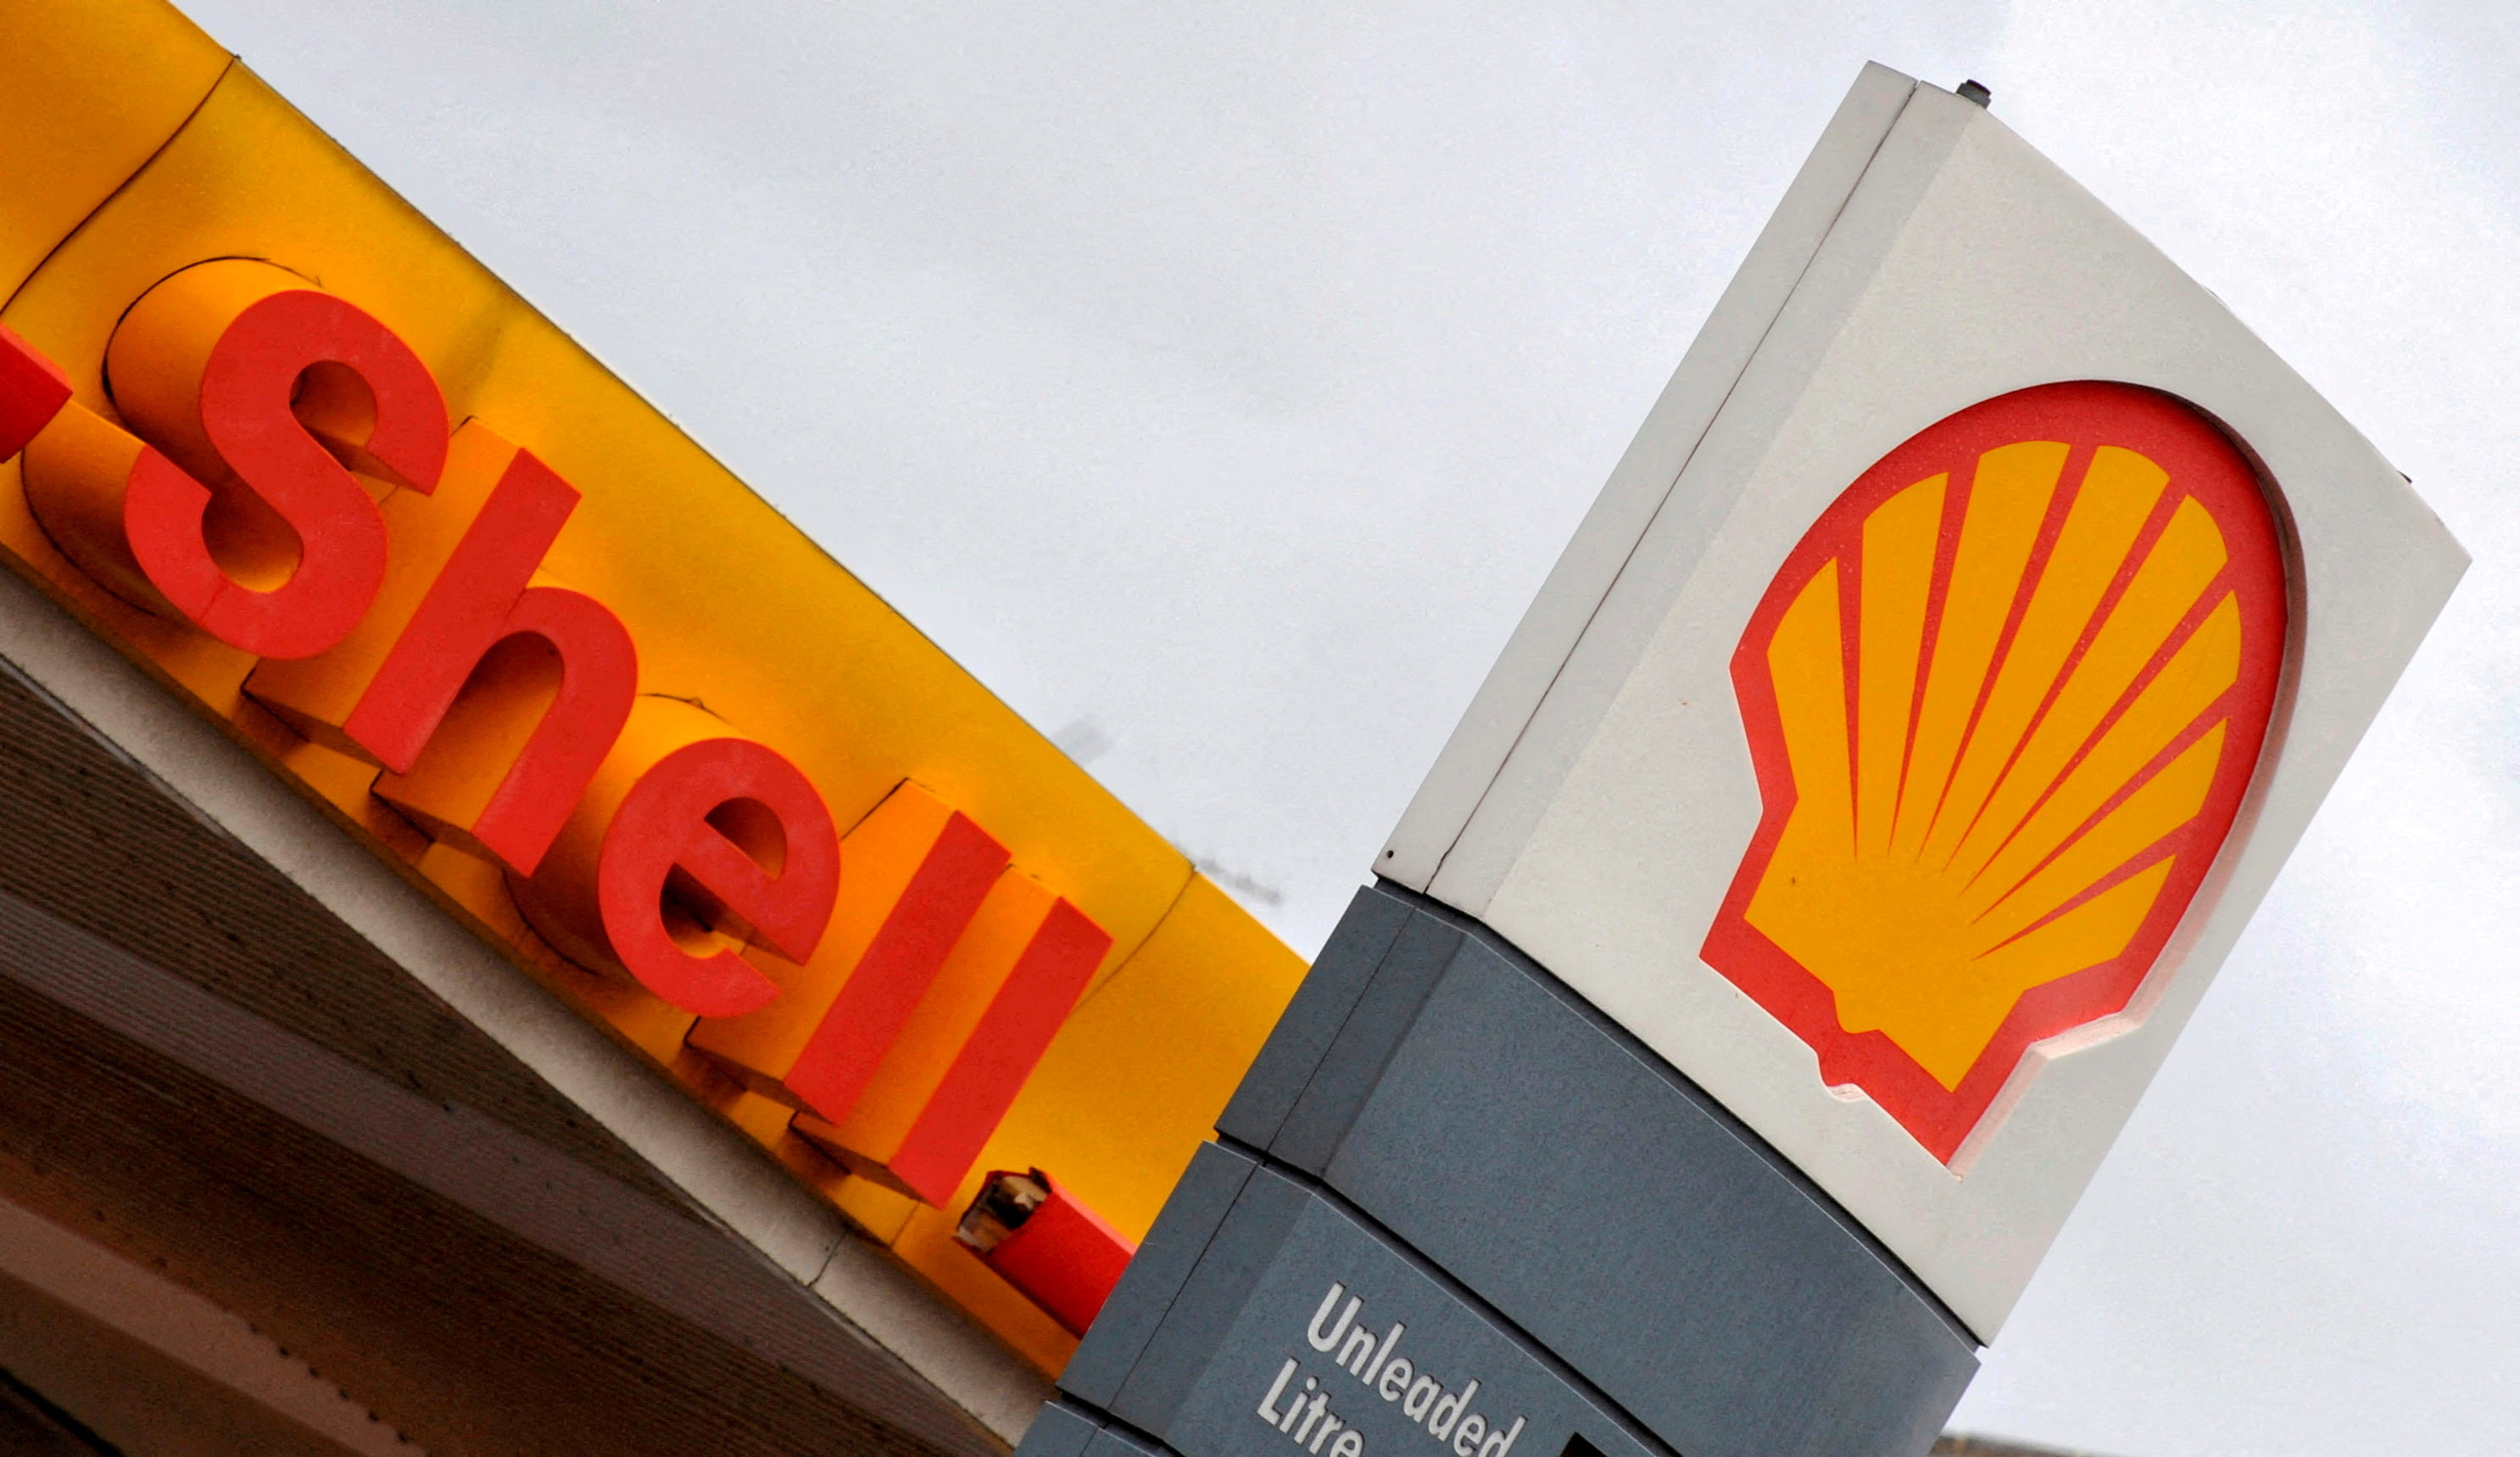 The Shell logo is seen at a Shell petrol station in London, Britain